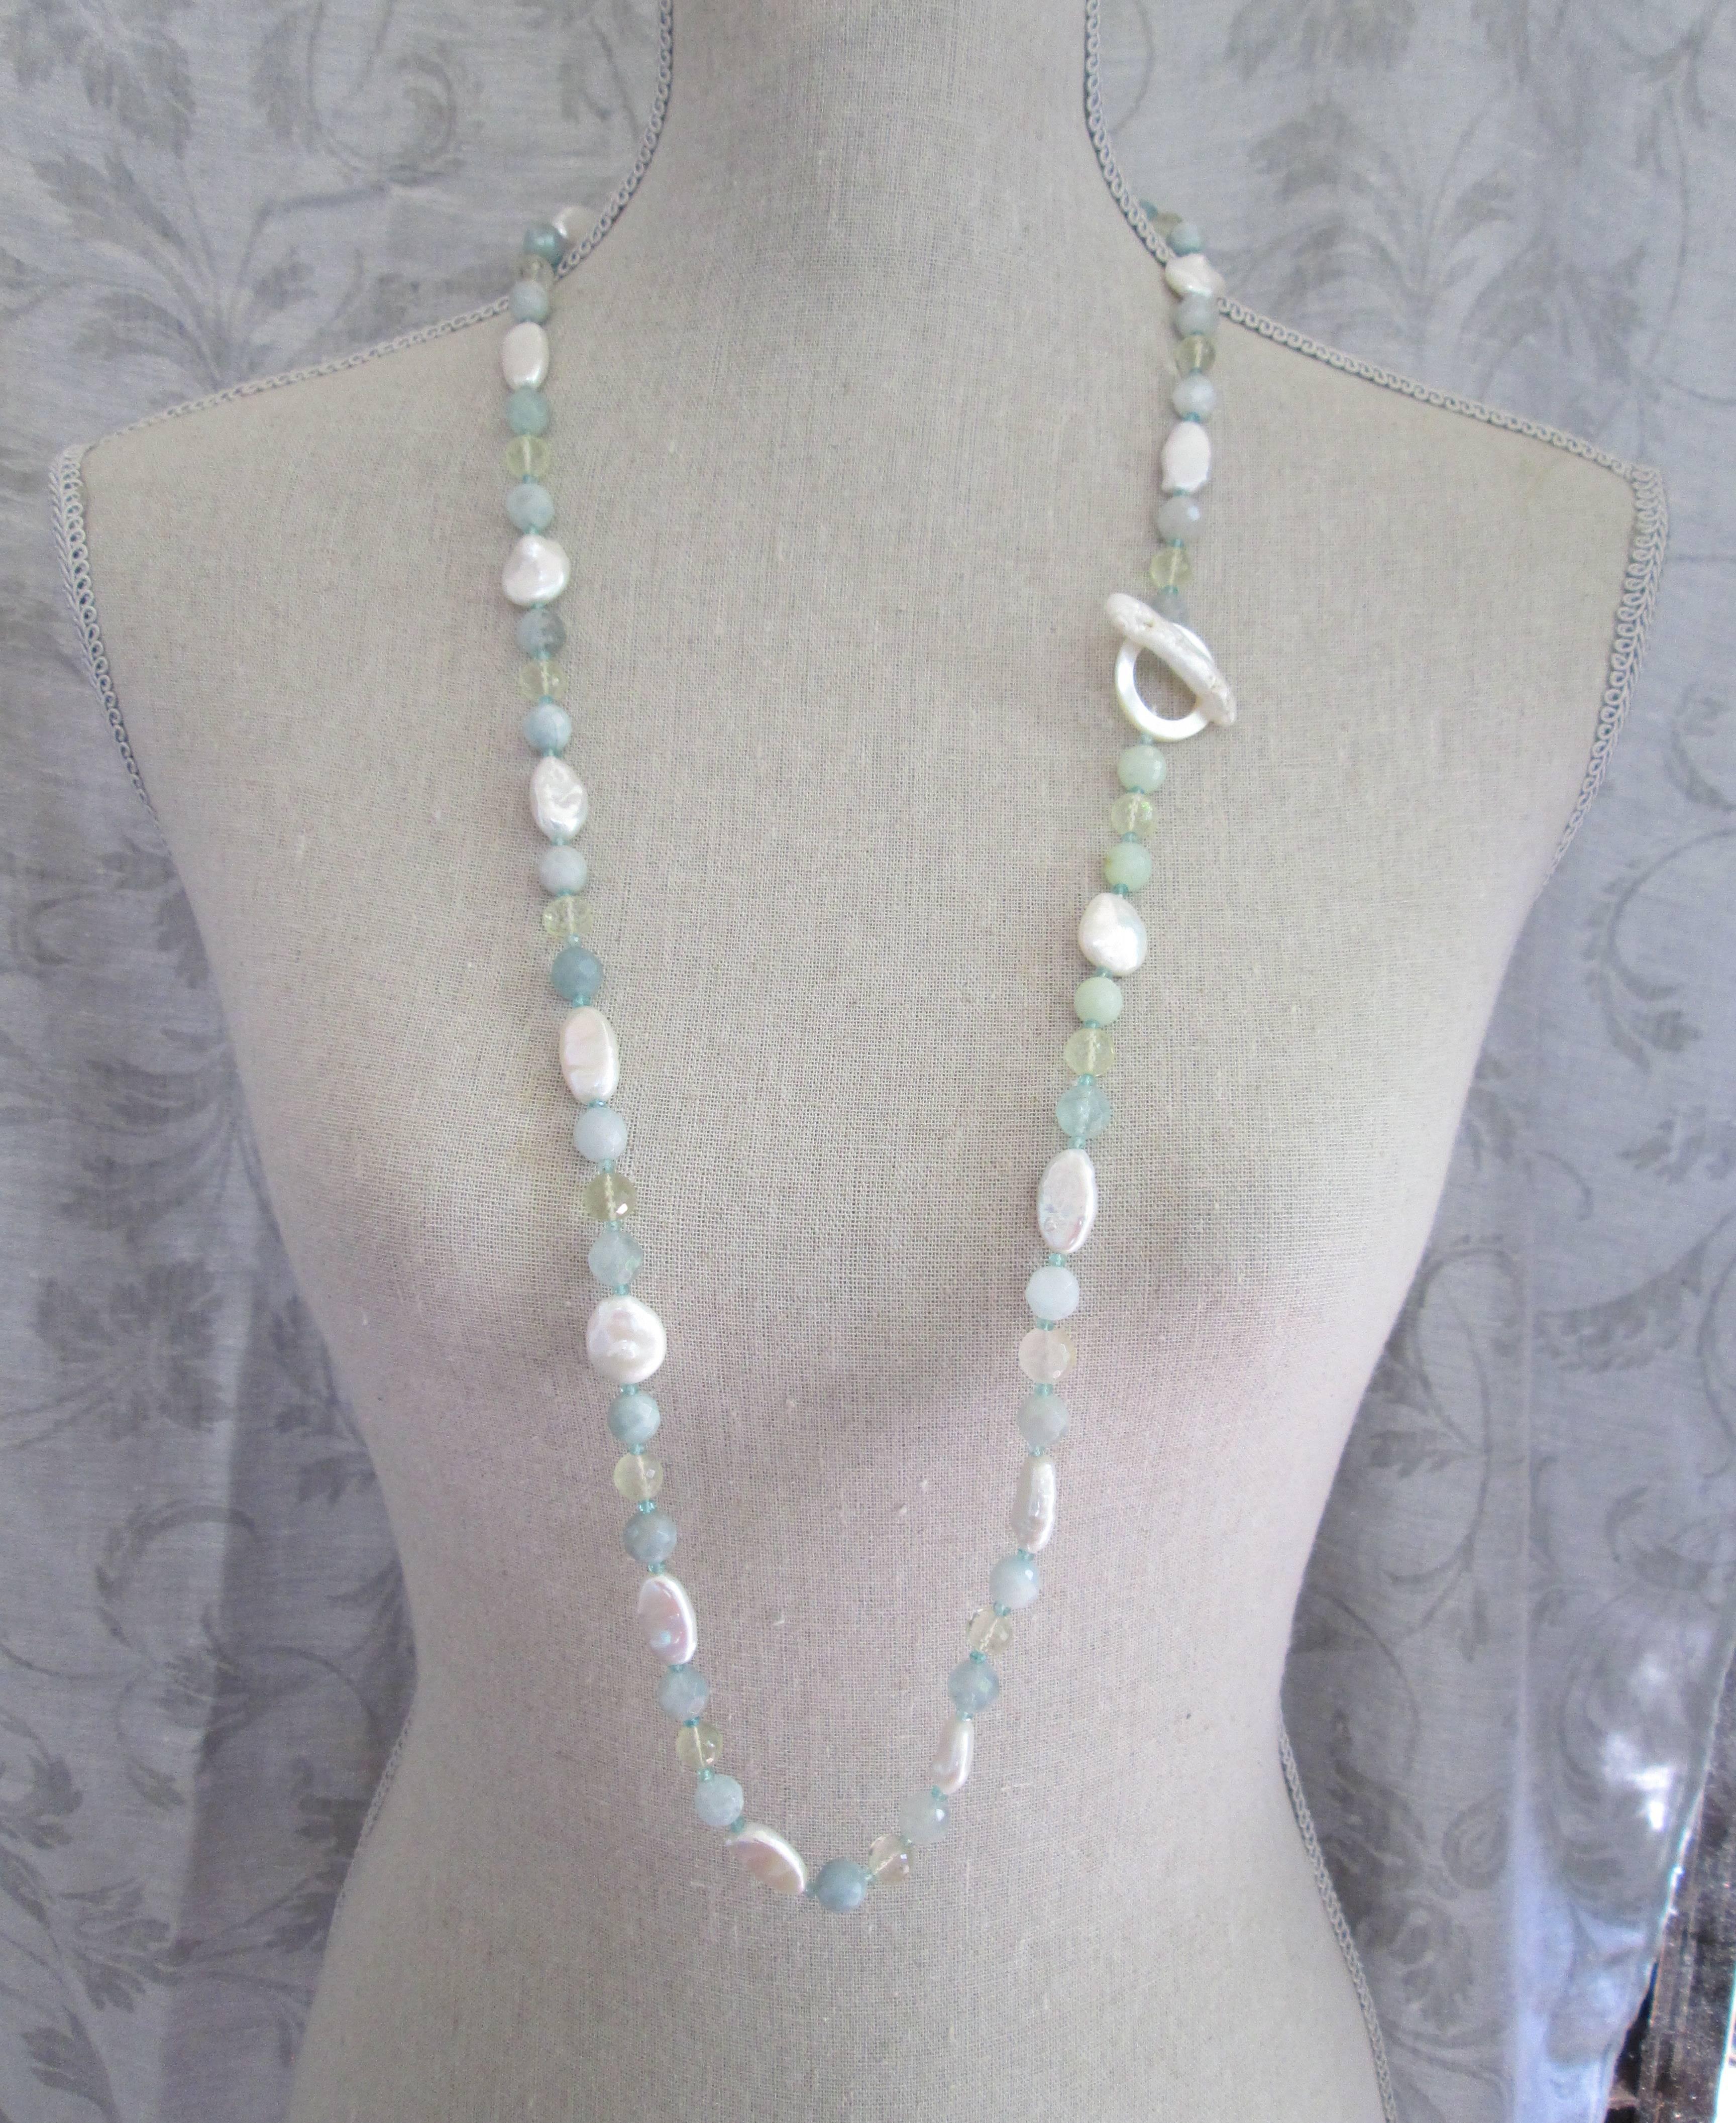 This gorgeous lariat necklace features pearls, aquamarine, citrine, green quartz, florite, and mother of pearl. Each stone is specifically chosen to create a mixed balanced form on the necklace pattern. Long and versatile, it can be worn open or